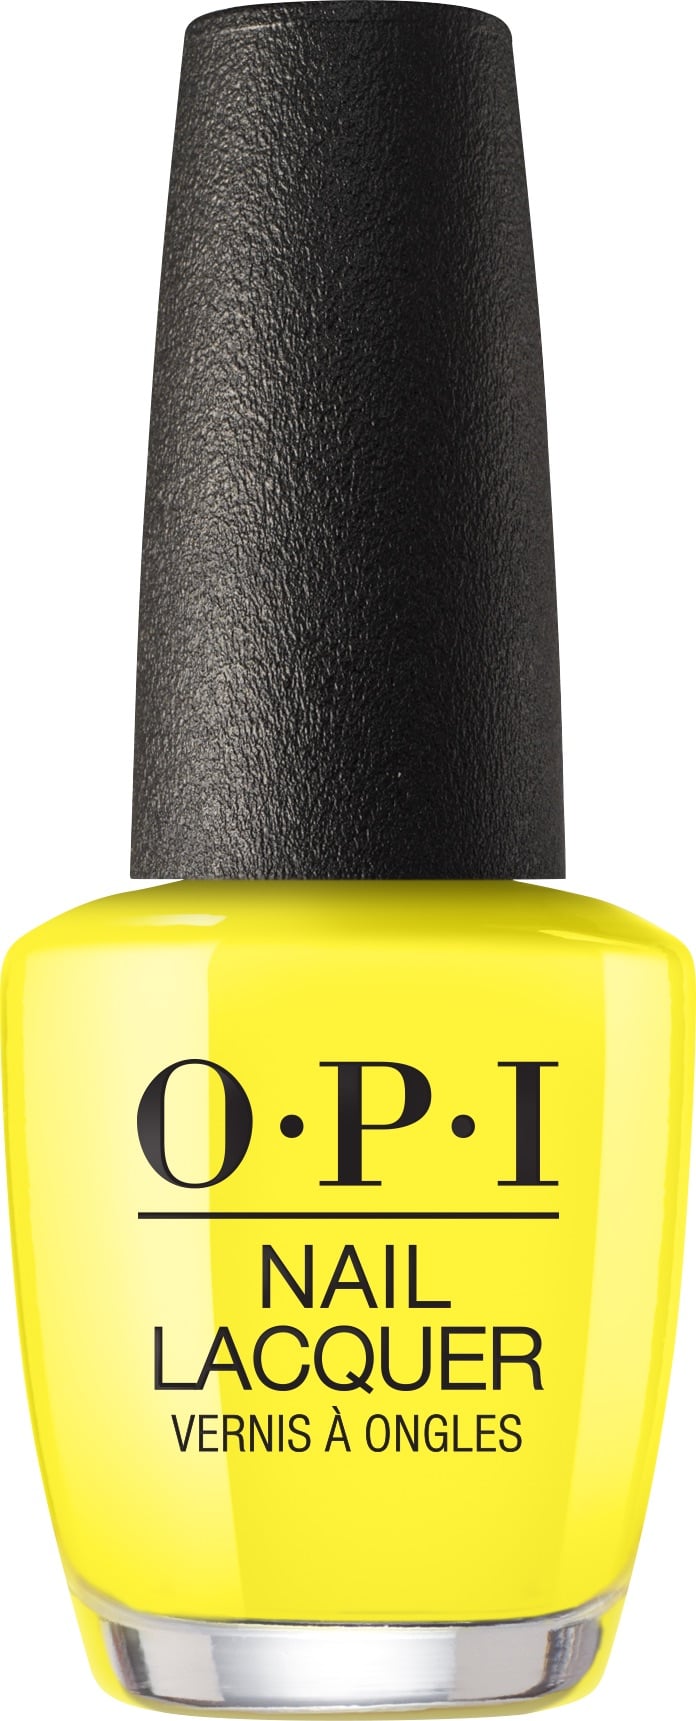 OPI Nail Lacquer in Pump Up the Volume